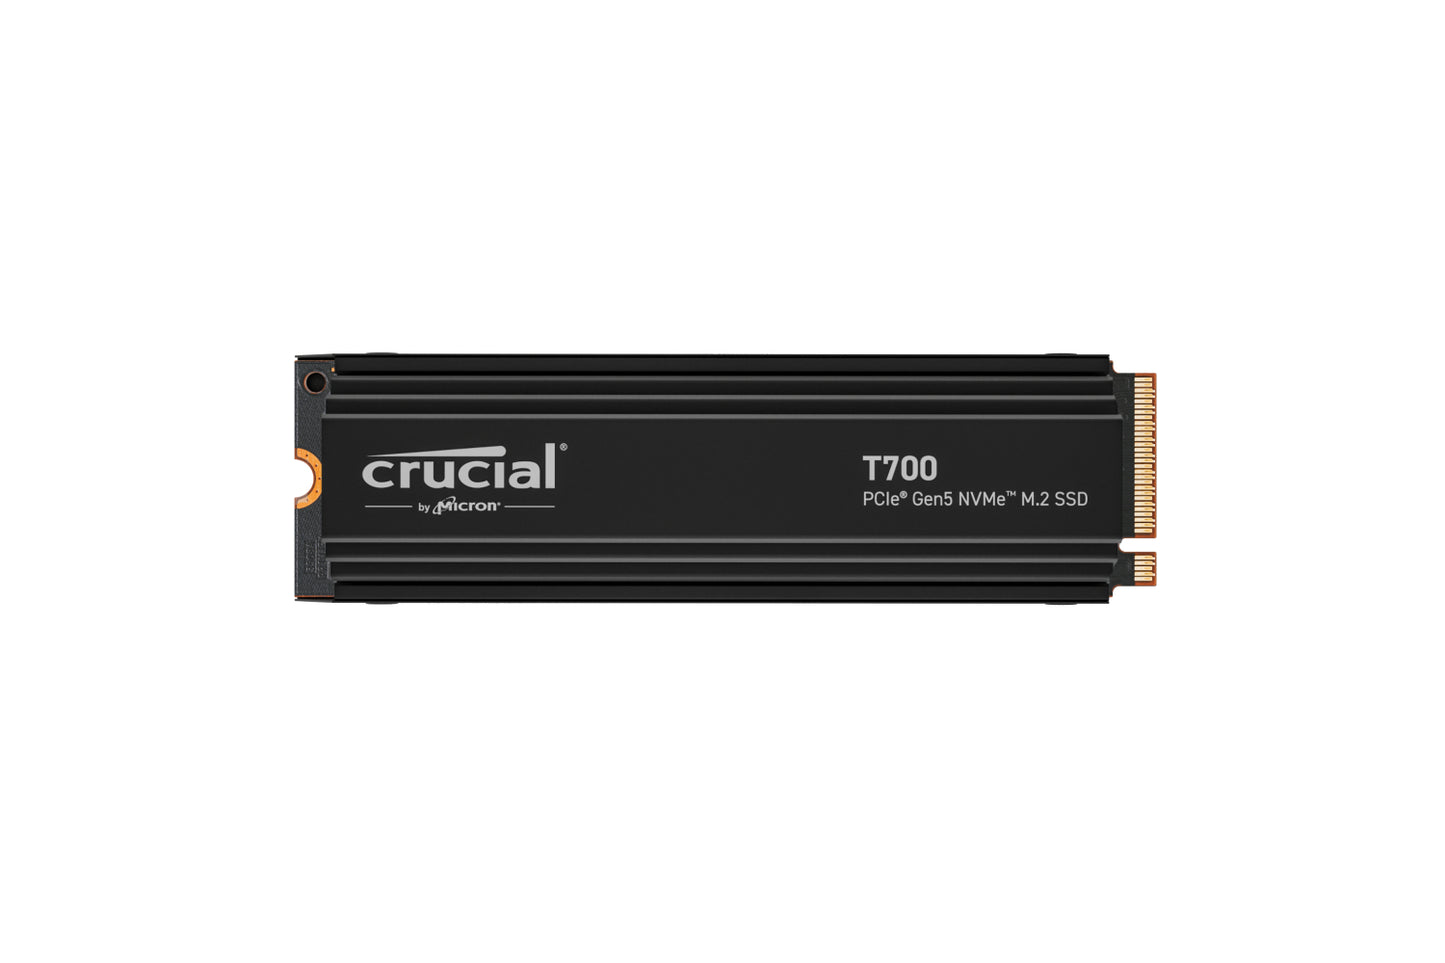 Crucial T700 1TB PCIe Gen5 NVMe M.2 SSD with heatsink speeds of up to 12,400MB/s sequential reads and up to 11,800MB/s sequential writes